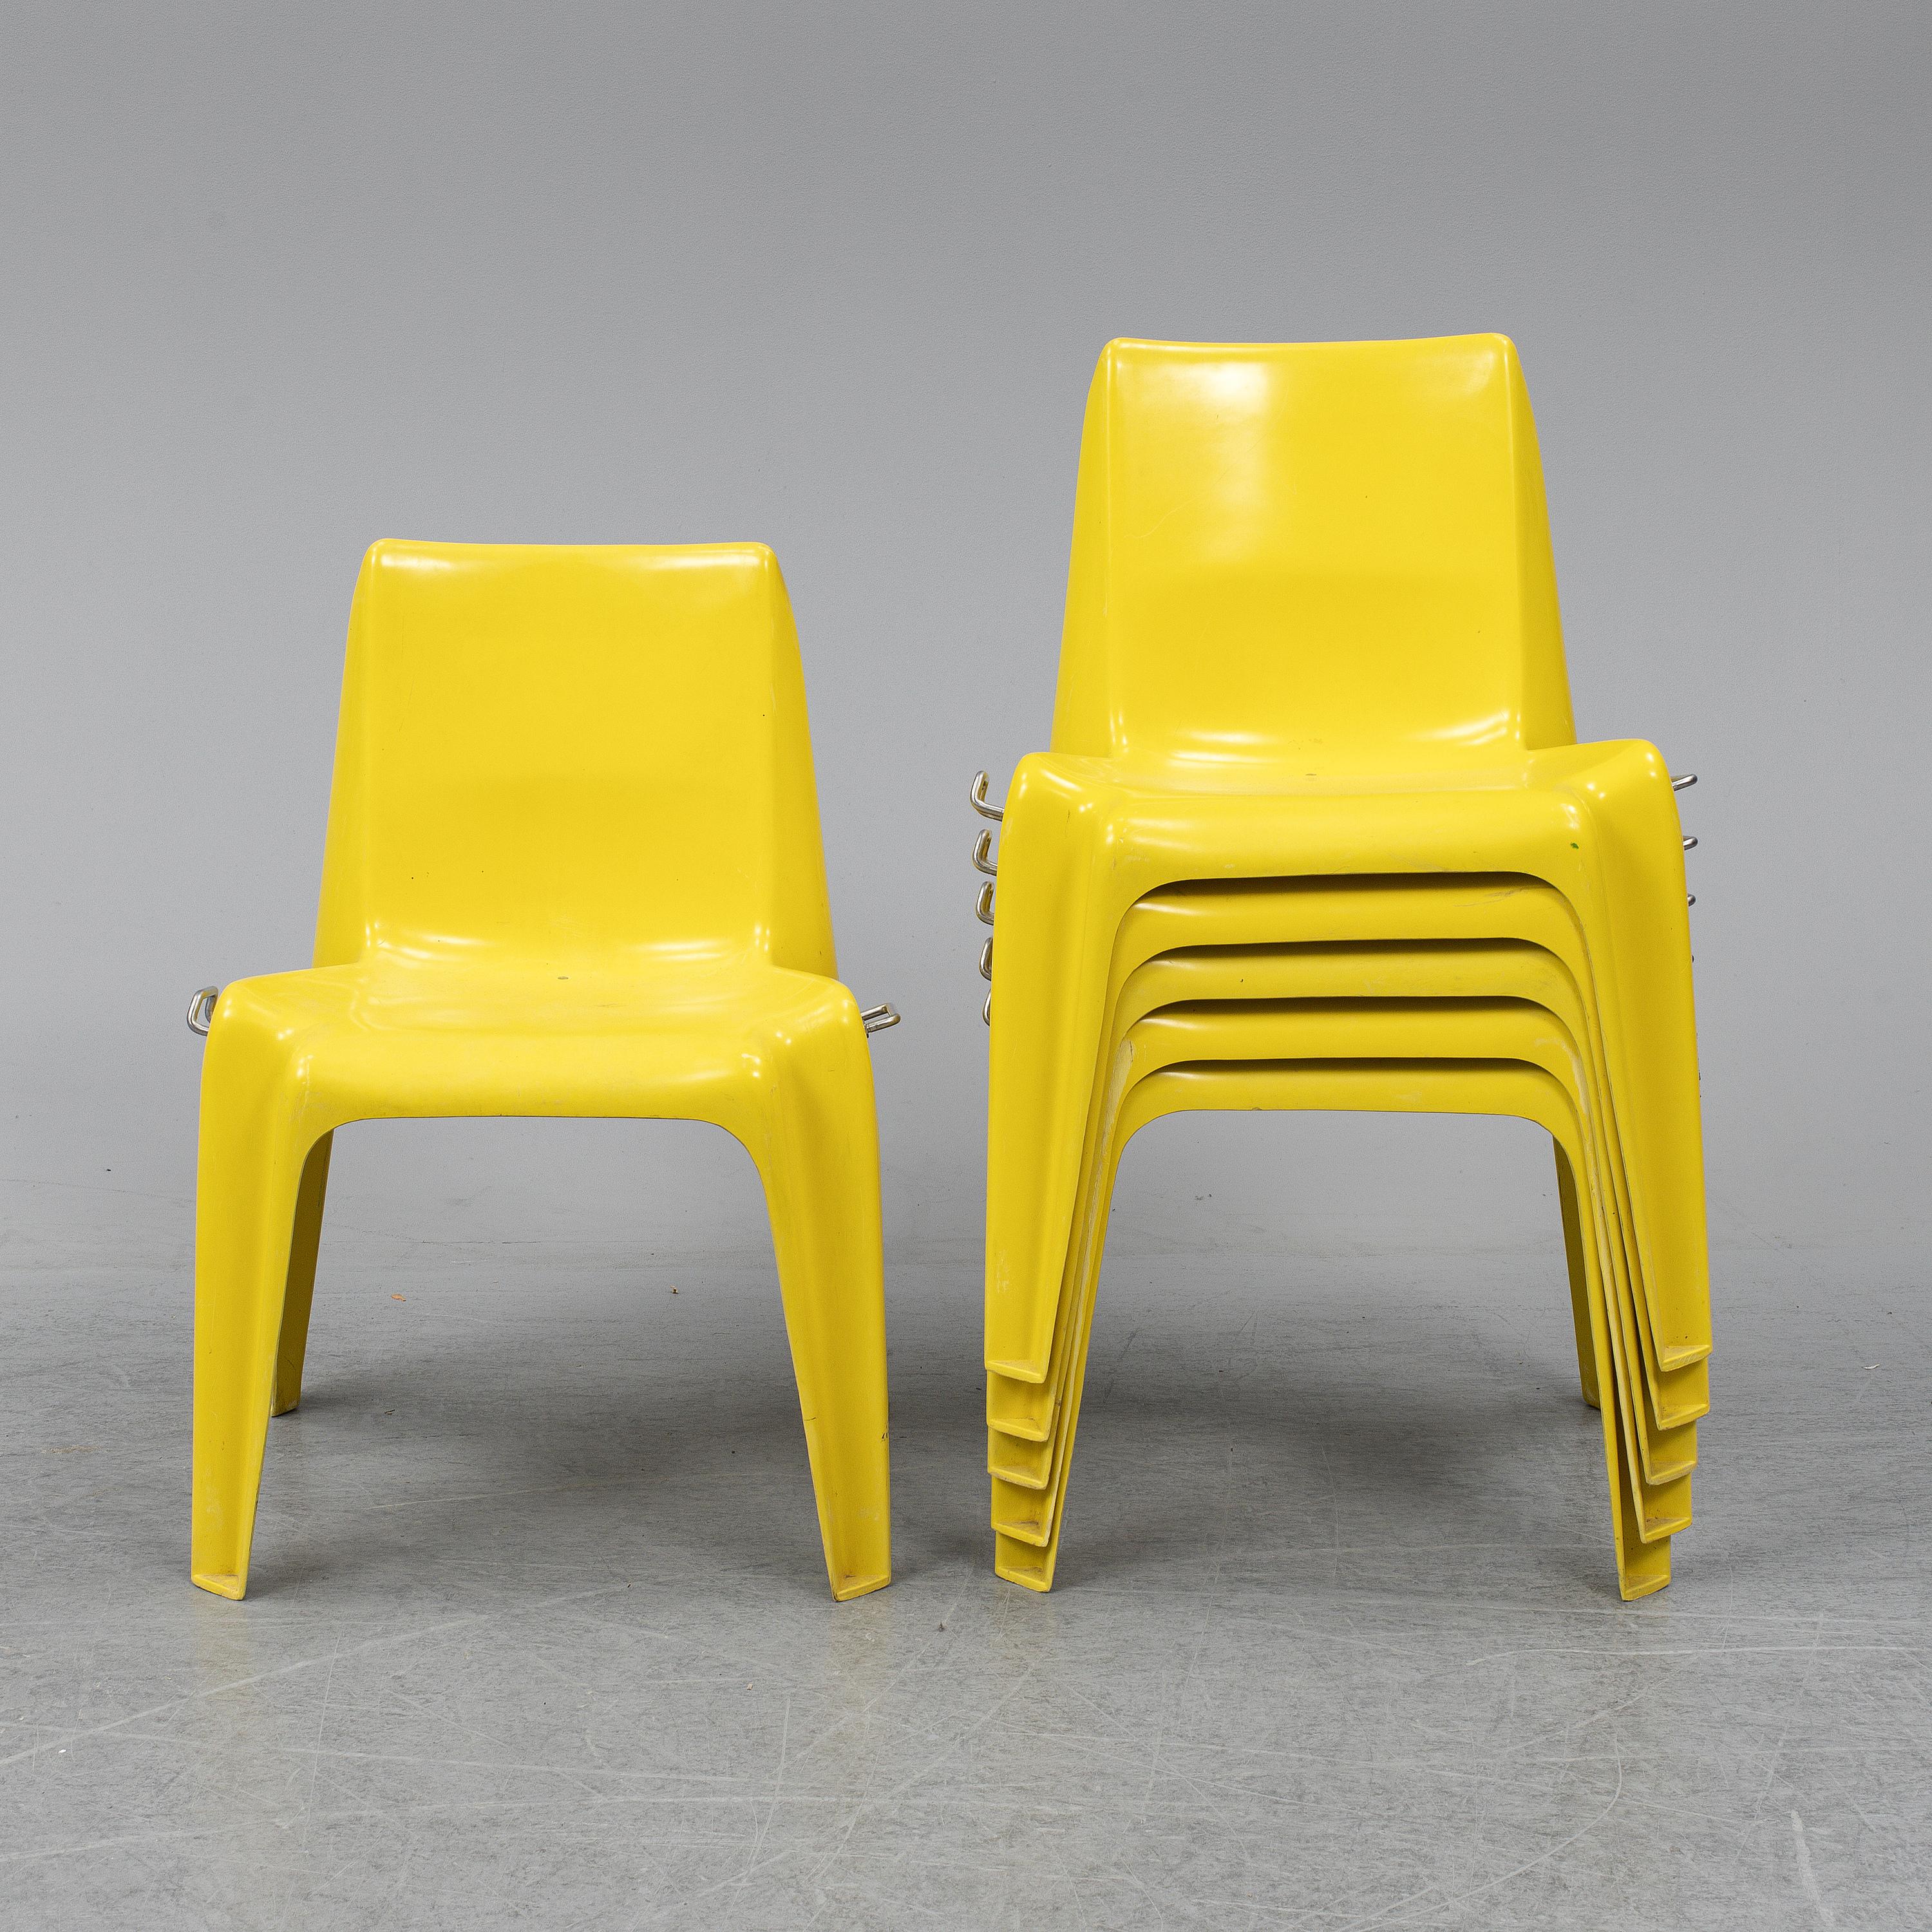 First edition of the model BA 1171 chairs designed by architect and designer Helmut Bätzner in 1964 for Bofinger in Germany. The stackable Bofinger chair was the first chair made in fiberglass reinforced polyester developed to be produced in one